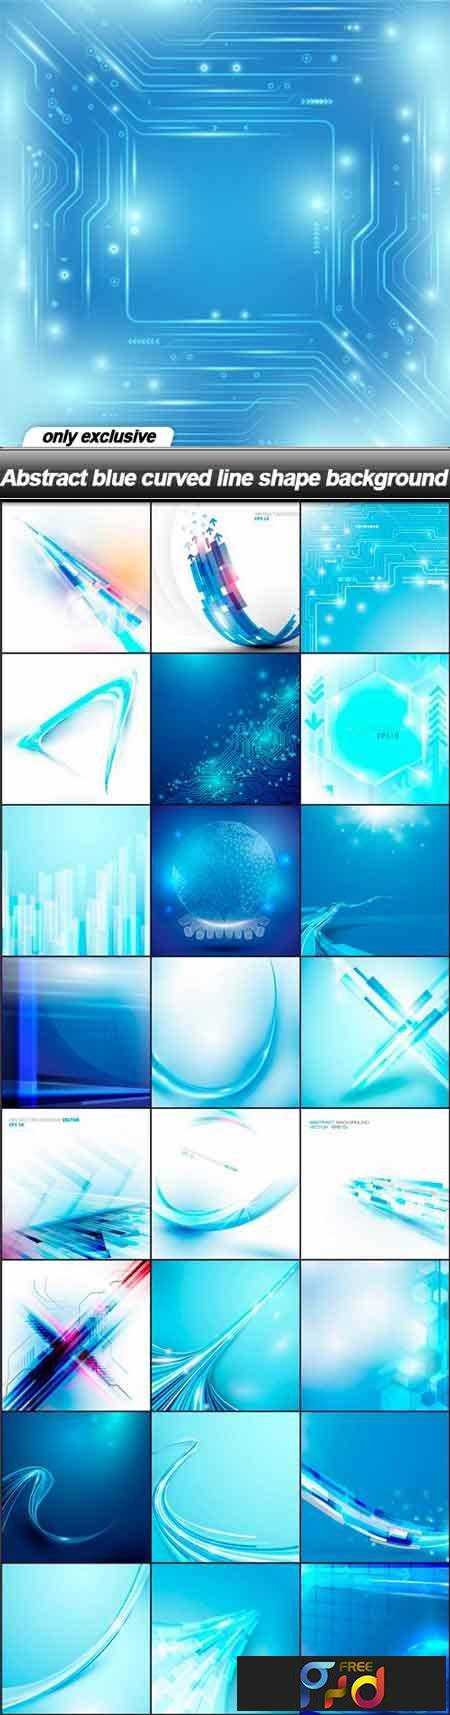 FreePsdVn.com_VECTOR_1701214_abstract_blue_curved_line_shape_background_25_eps